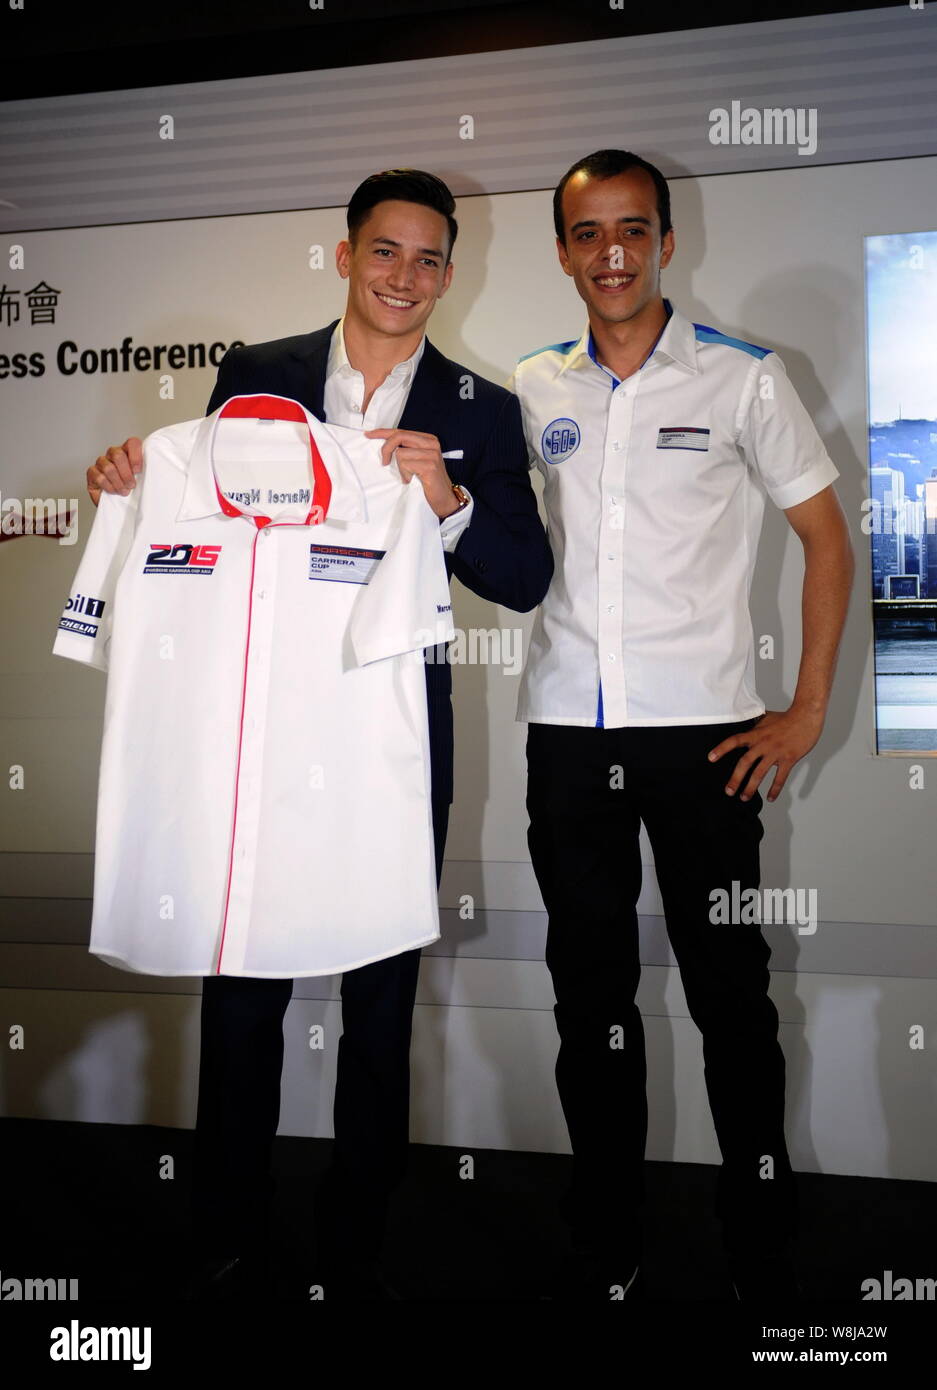 German gymnast Marcel Nguyen, left, poses during a press conference for the 2015 Porsche Carrera Cup Asia season in Hong Kong, China, 1 April 2015. Stock Photo